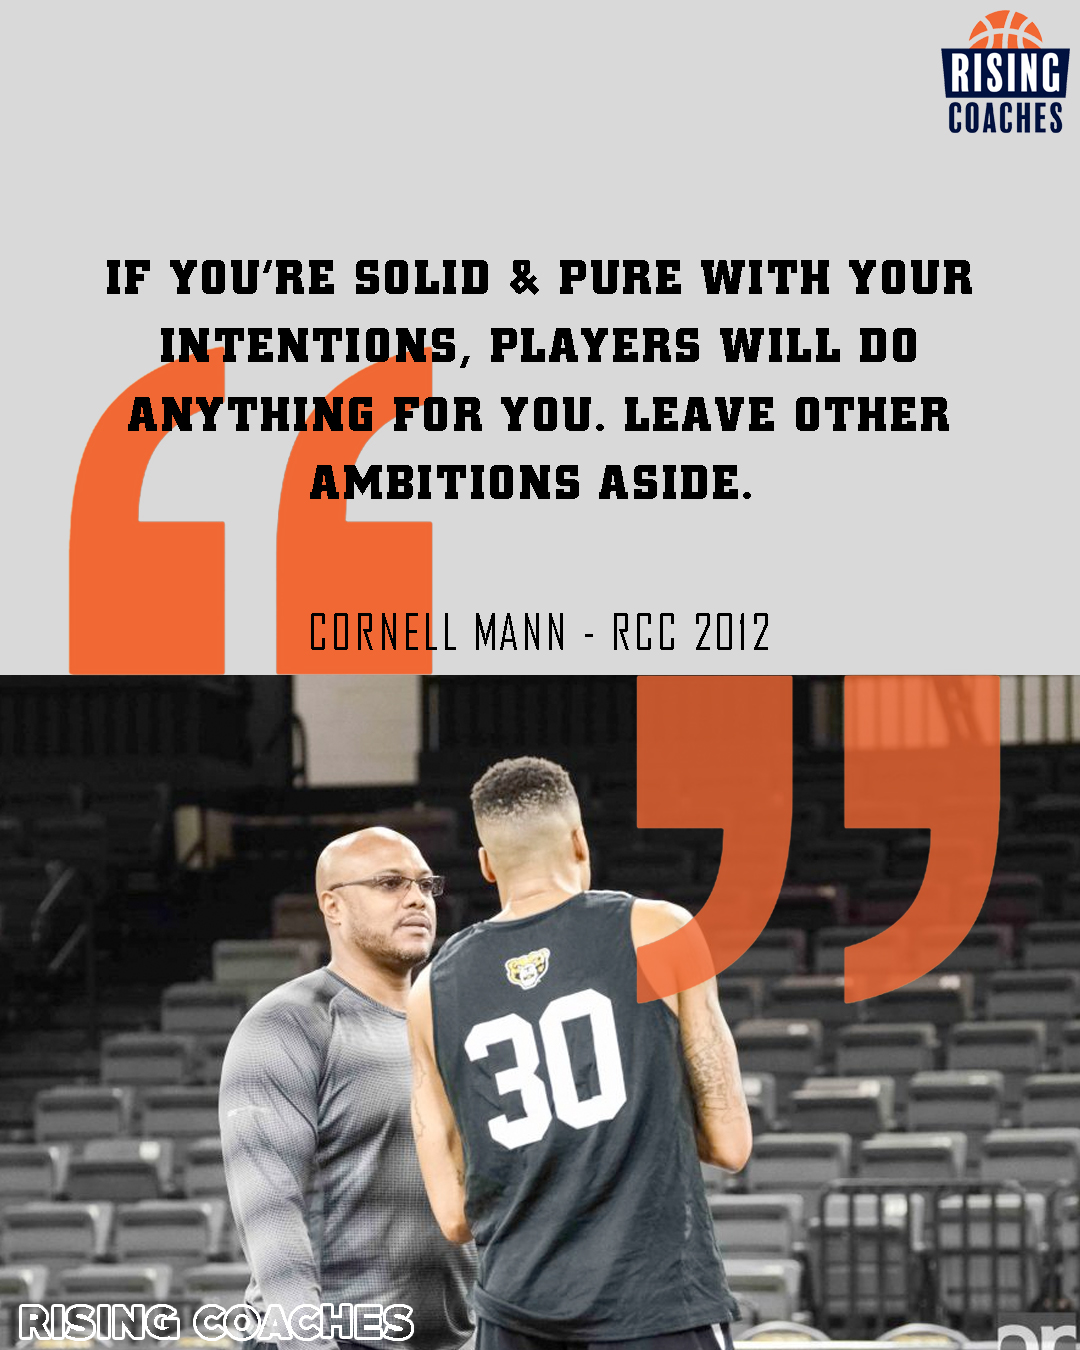 Quotes: Cornell Mann on Having Pure Intentions with Your Players